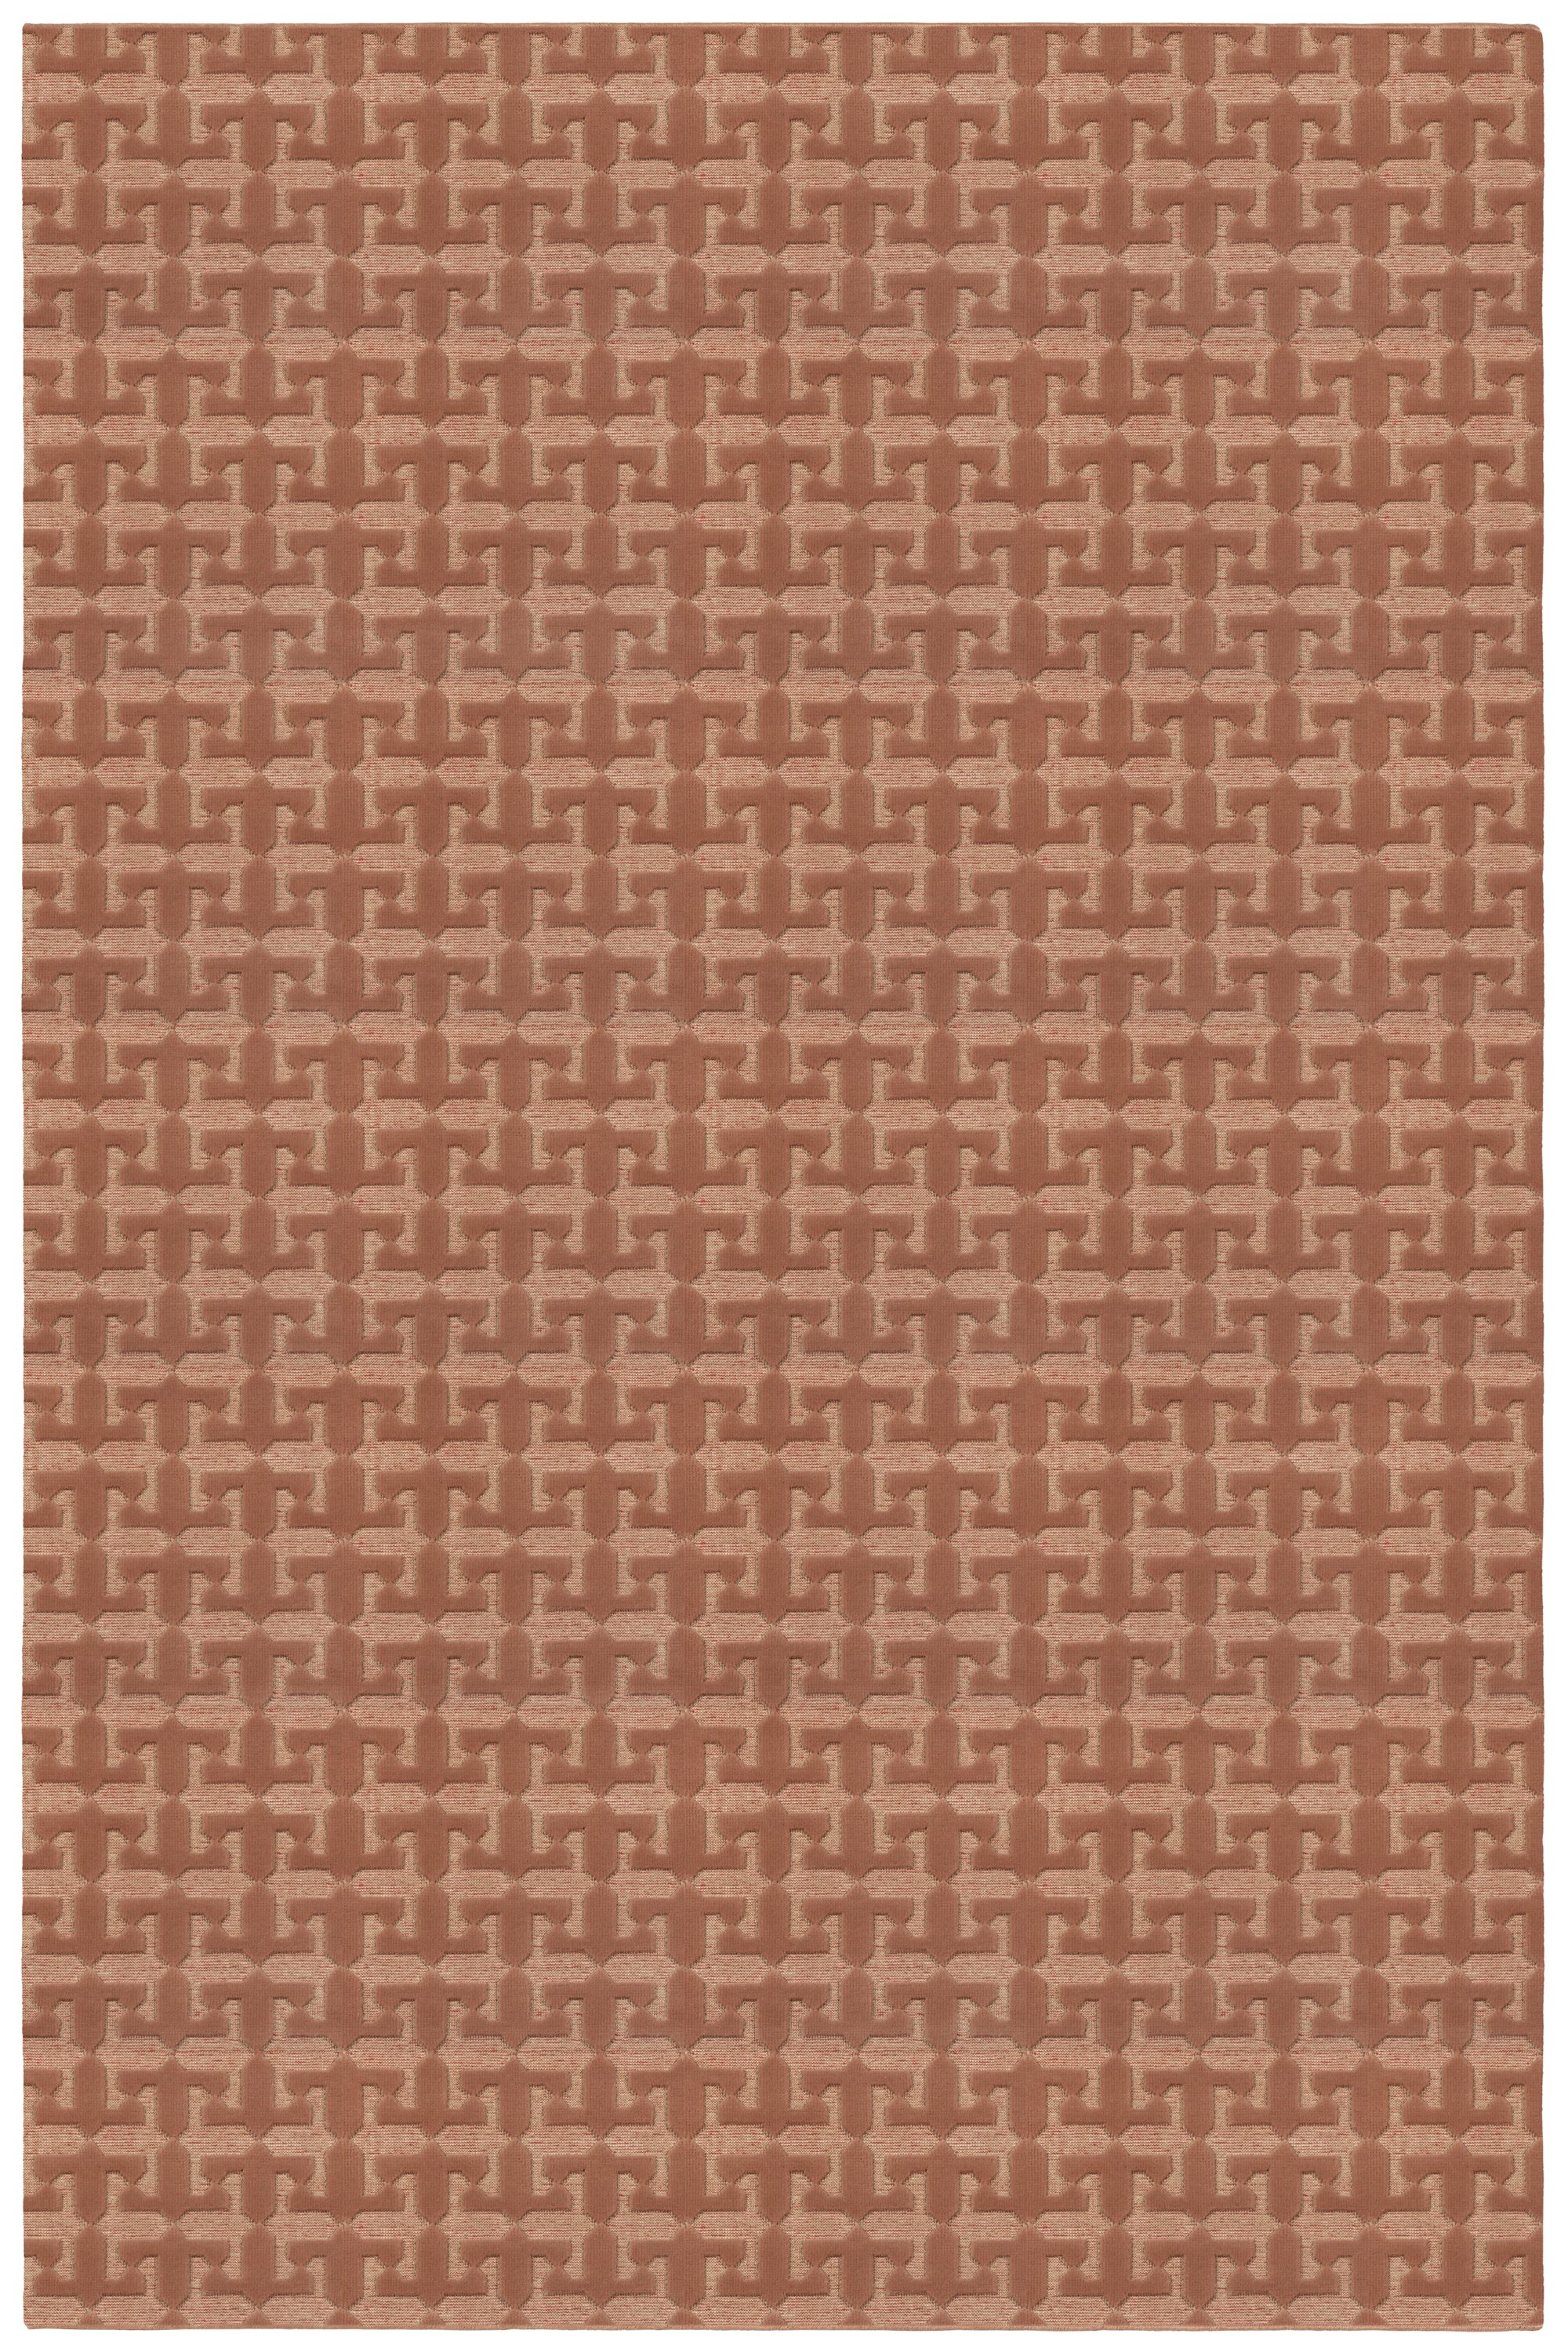 Full size Iseo Rug in Conch, a textural monochromatic abstract geometric pattern in terracotta coral color. 